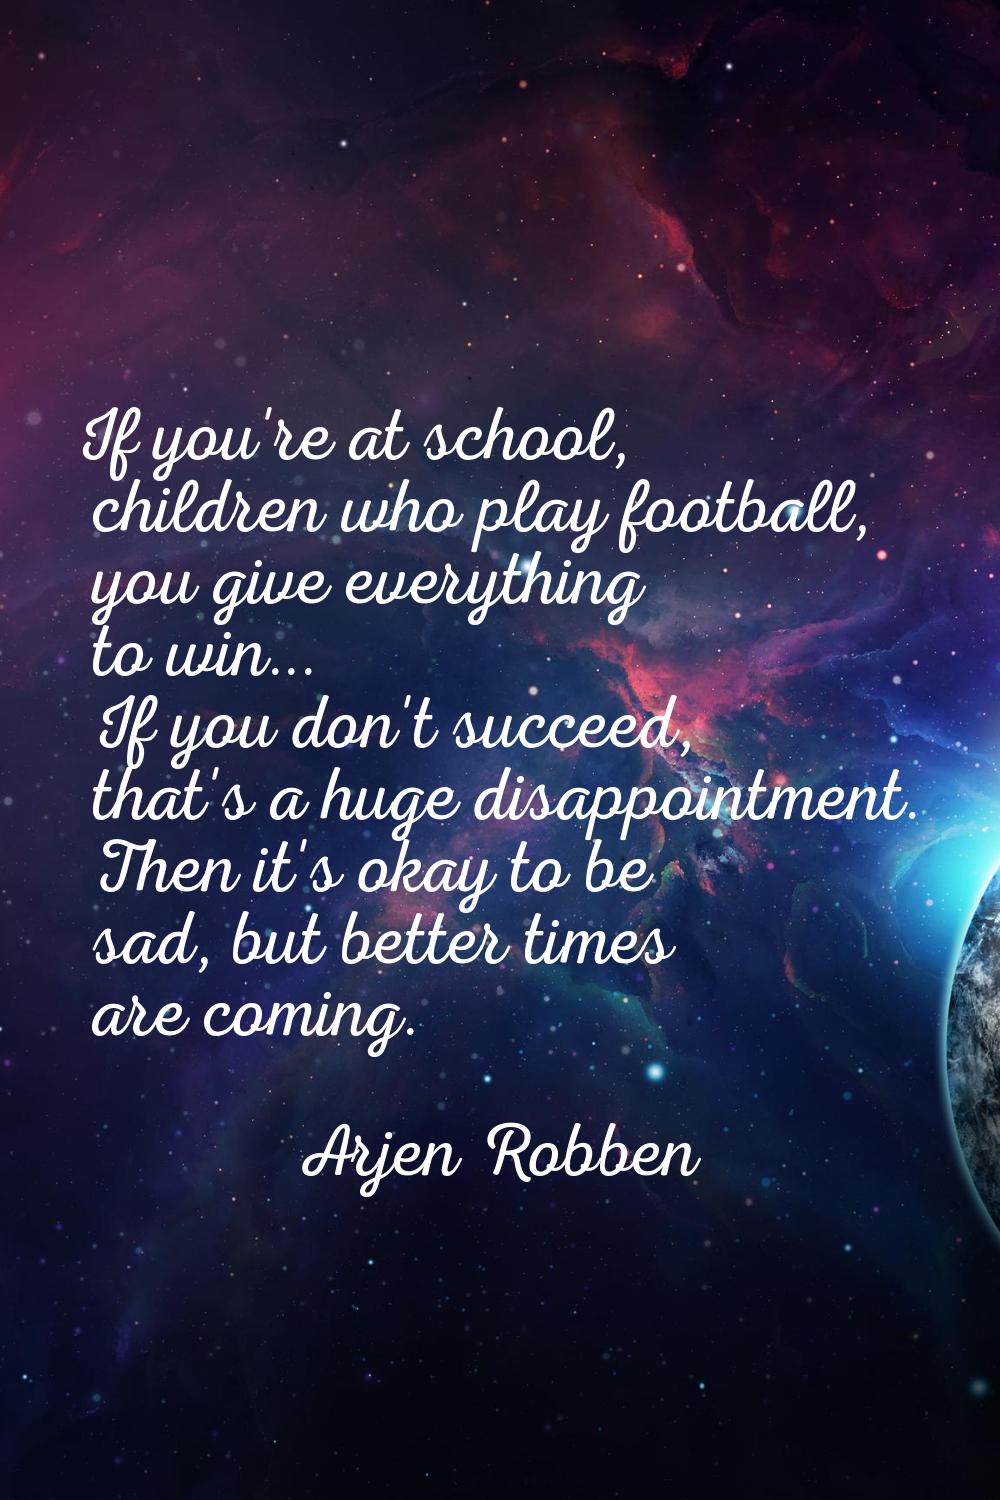 If you're at school, children who play football, you give everything to win... If you don't succeed